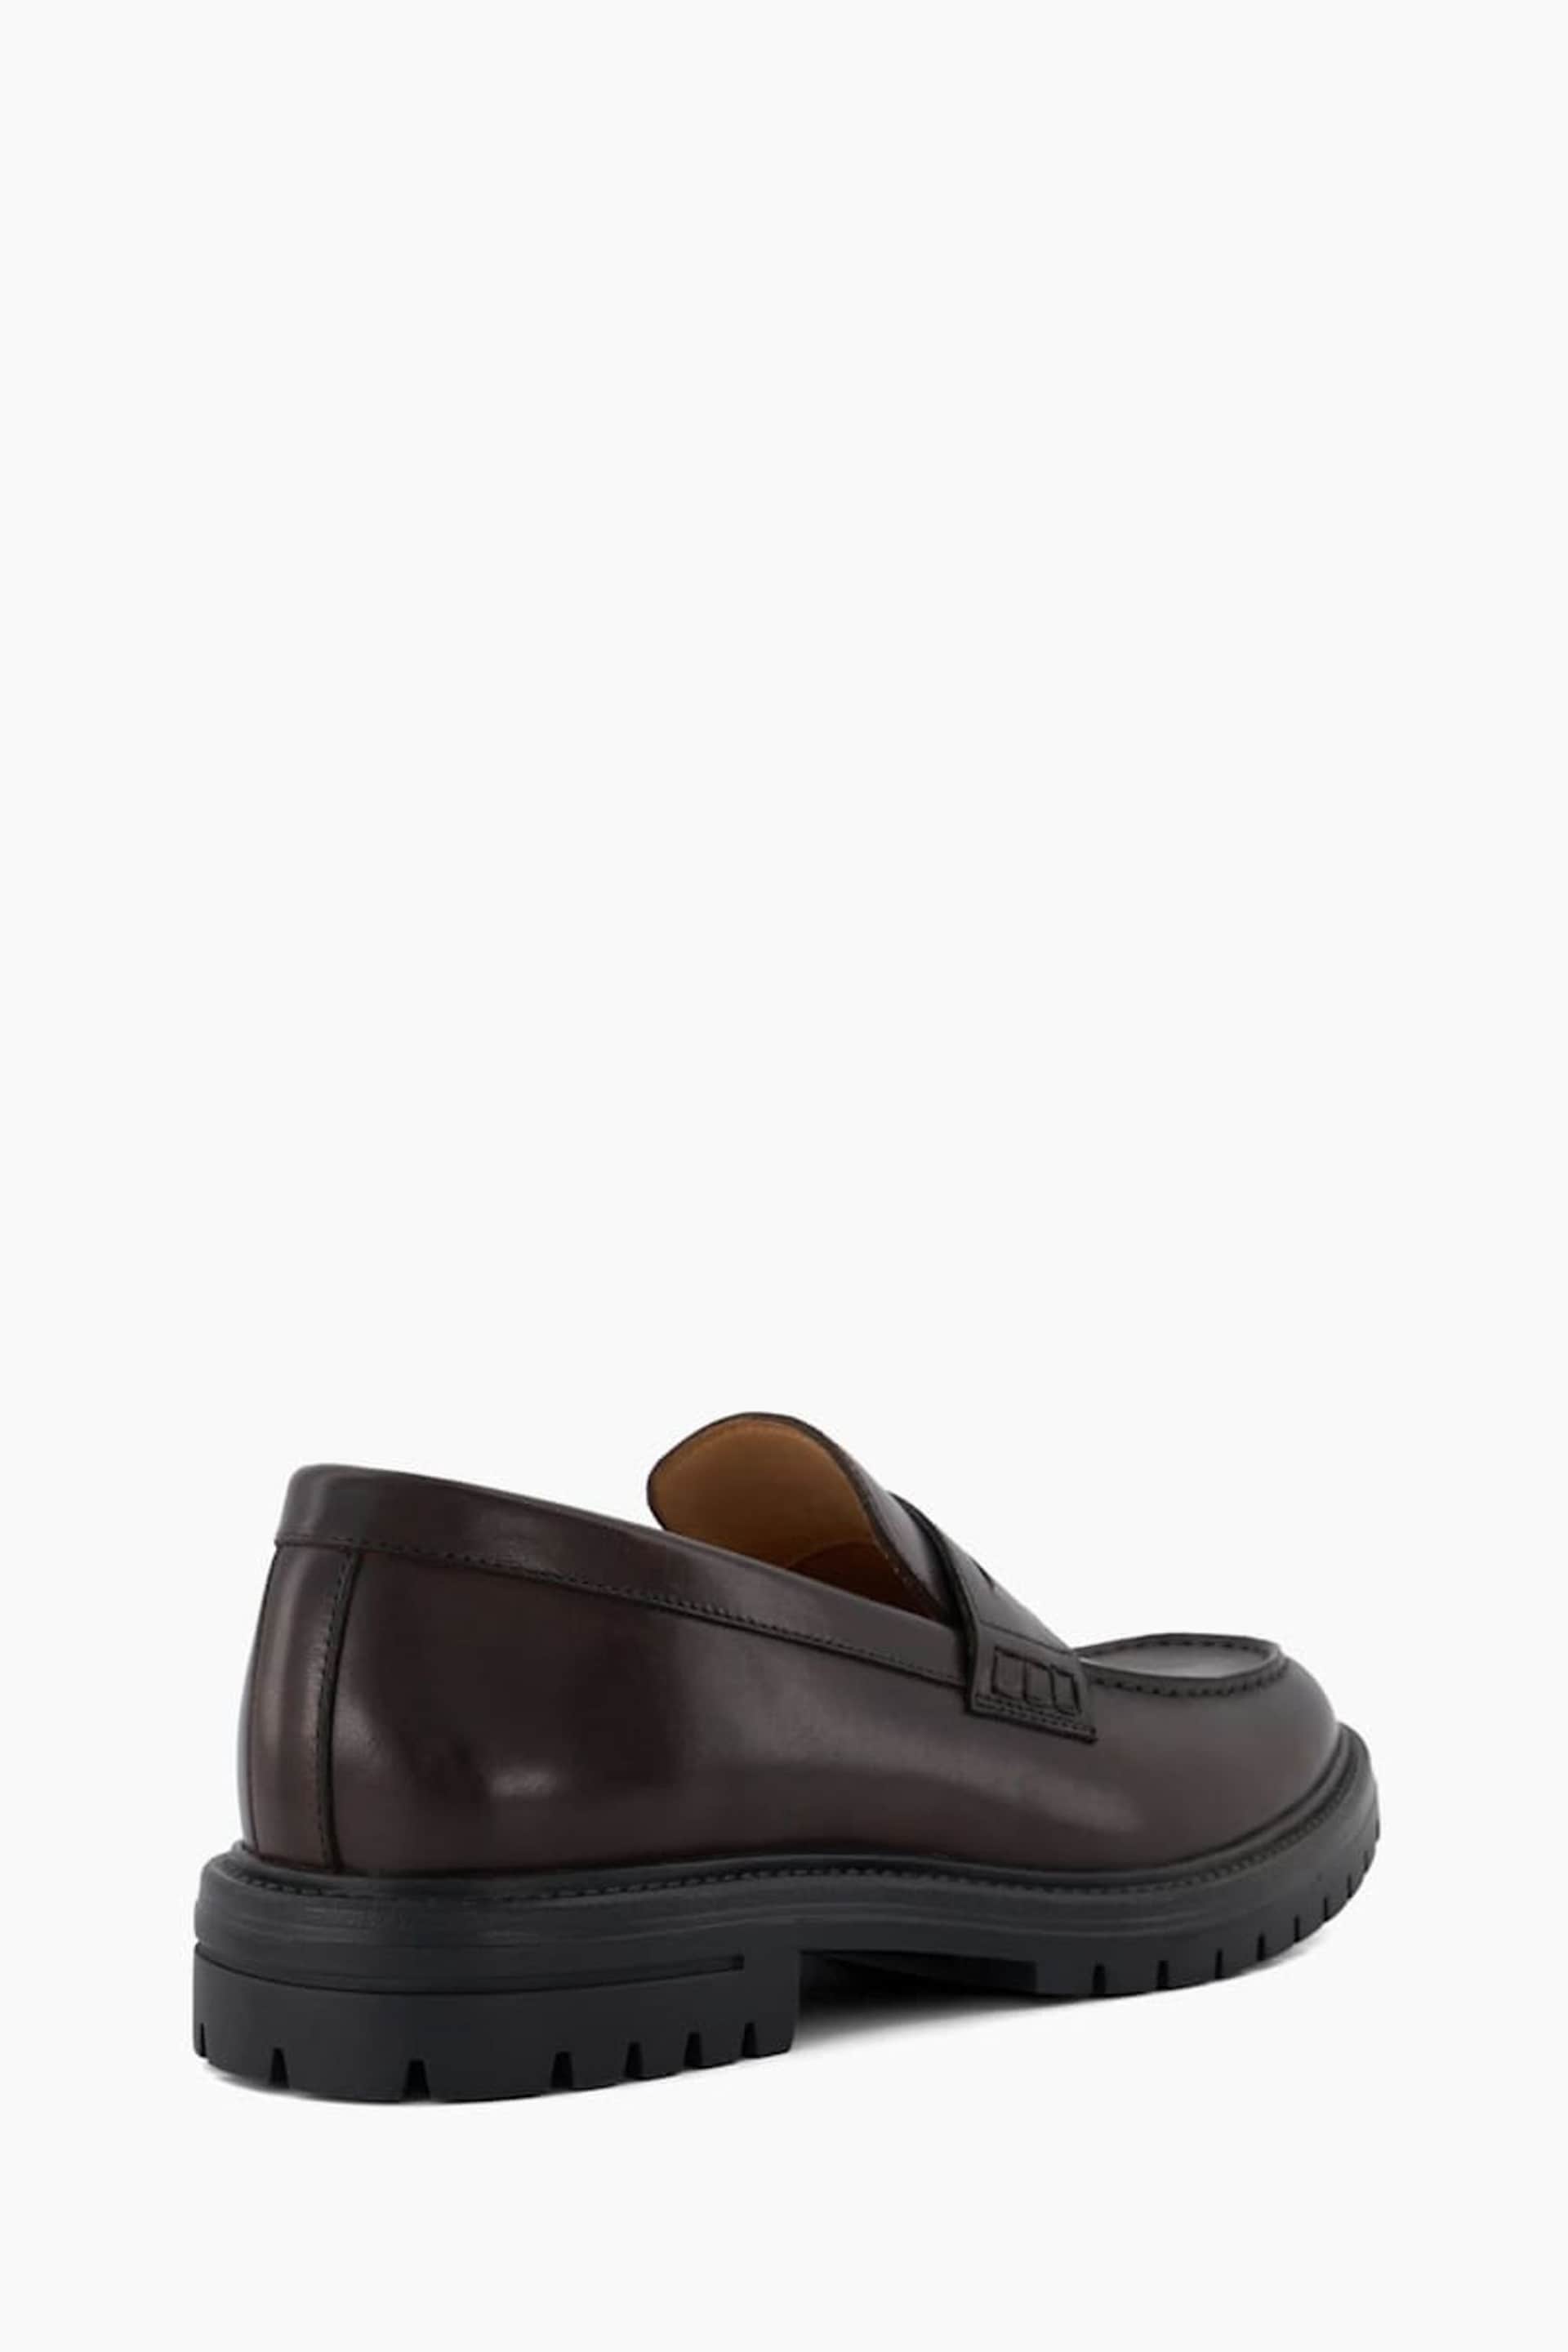 Dune London Brown Banking Cleated Sole Penny Loafers - Image 4 of 5